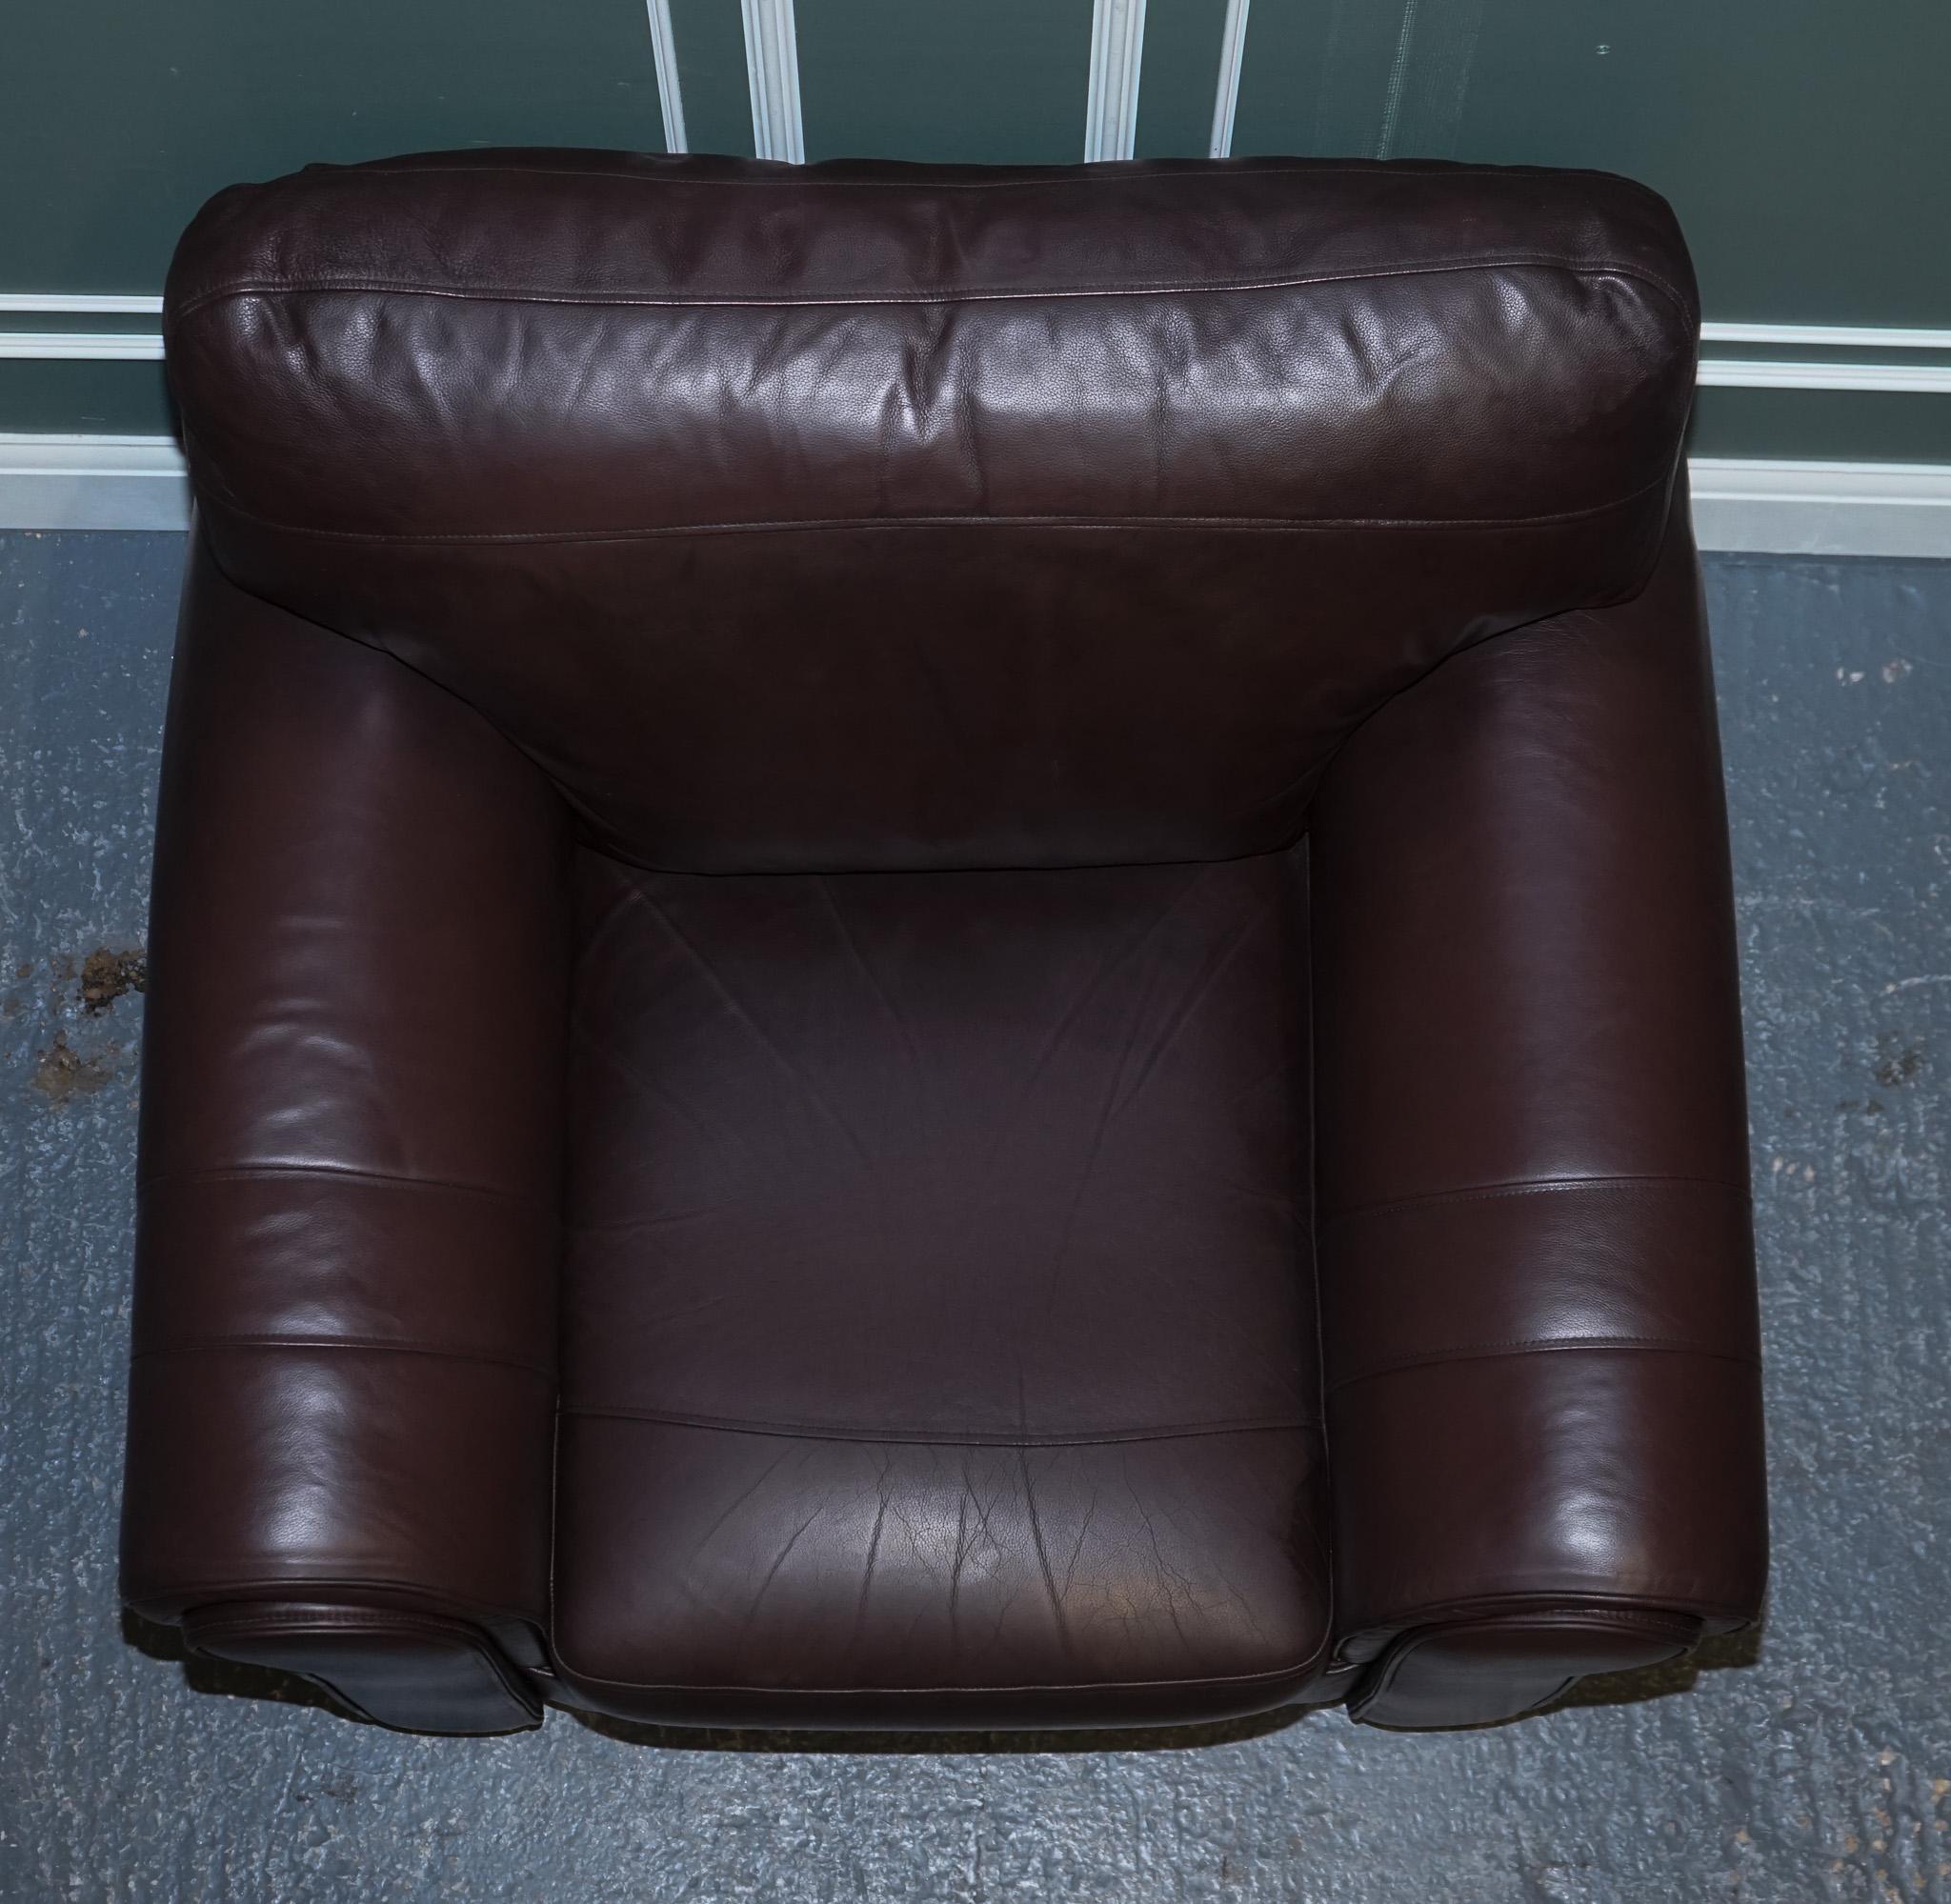 PAIR OF LARGE COMFORTABLE BROWN LEATHER ARMCHAIRS, MATCHiNG SOFA AVAILABLE For Sale 5